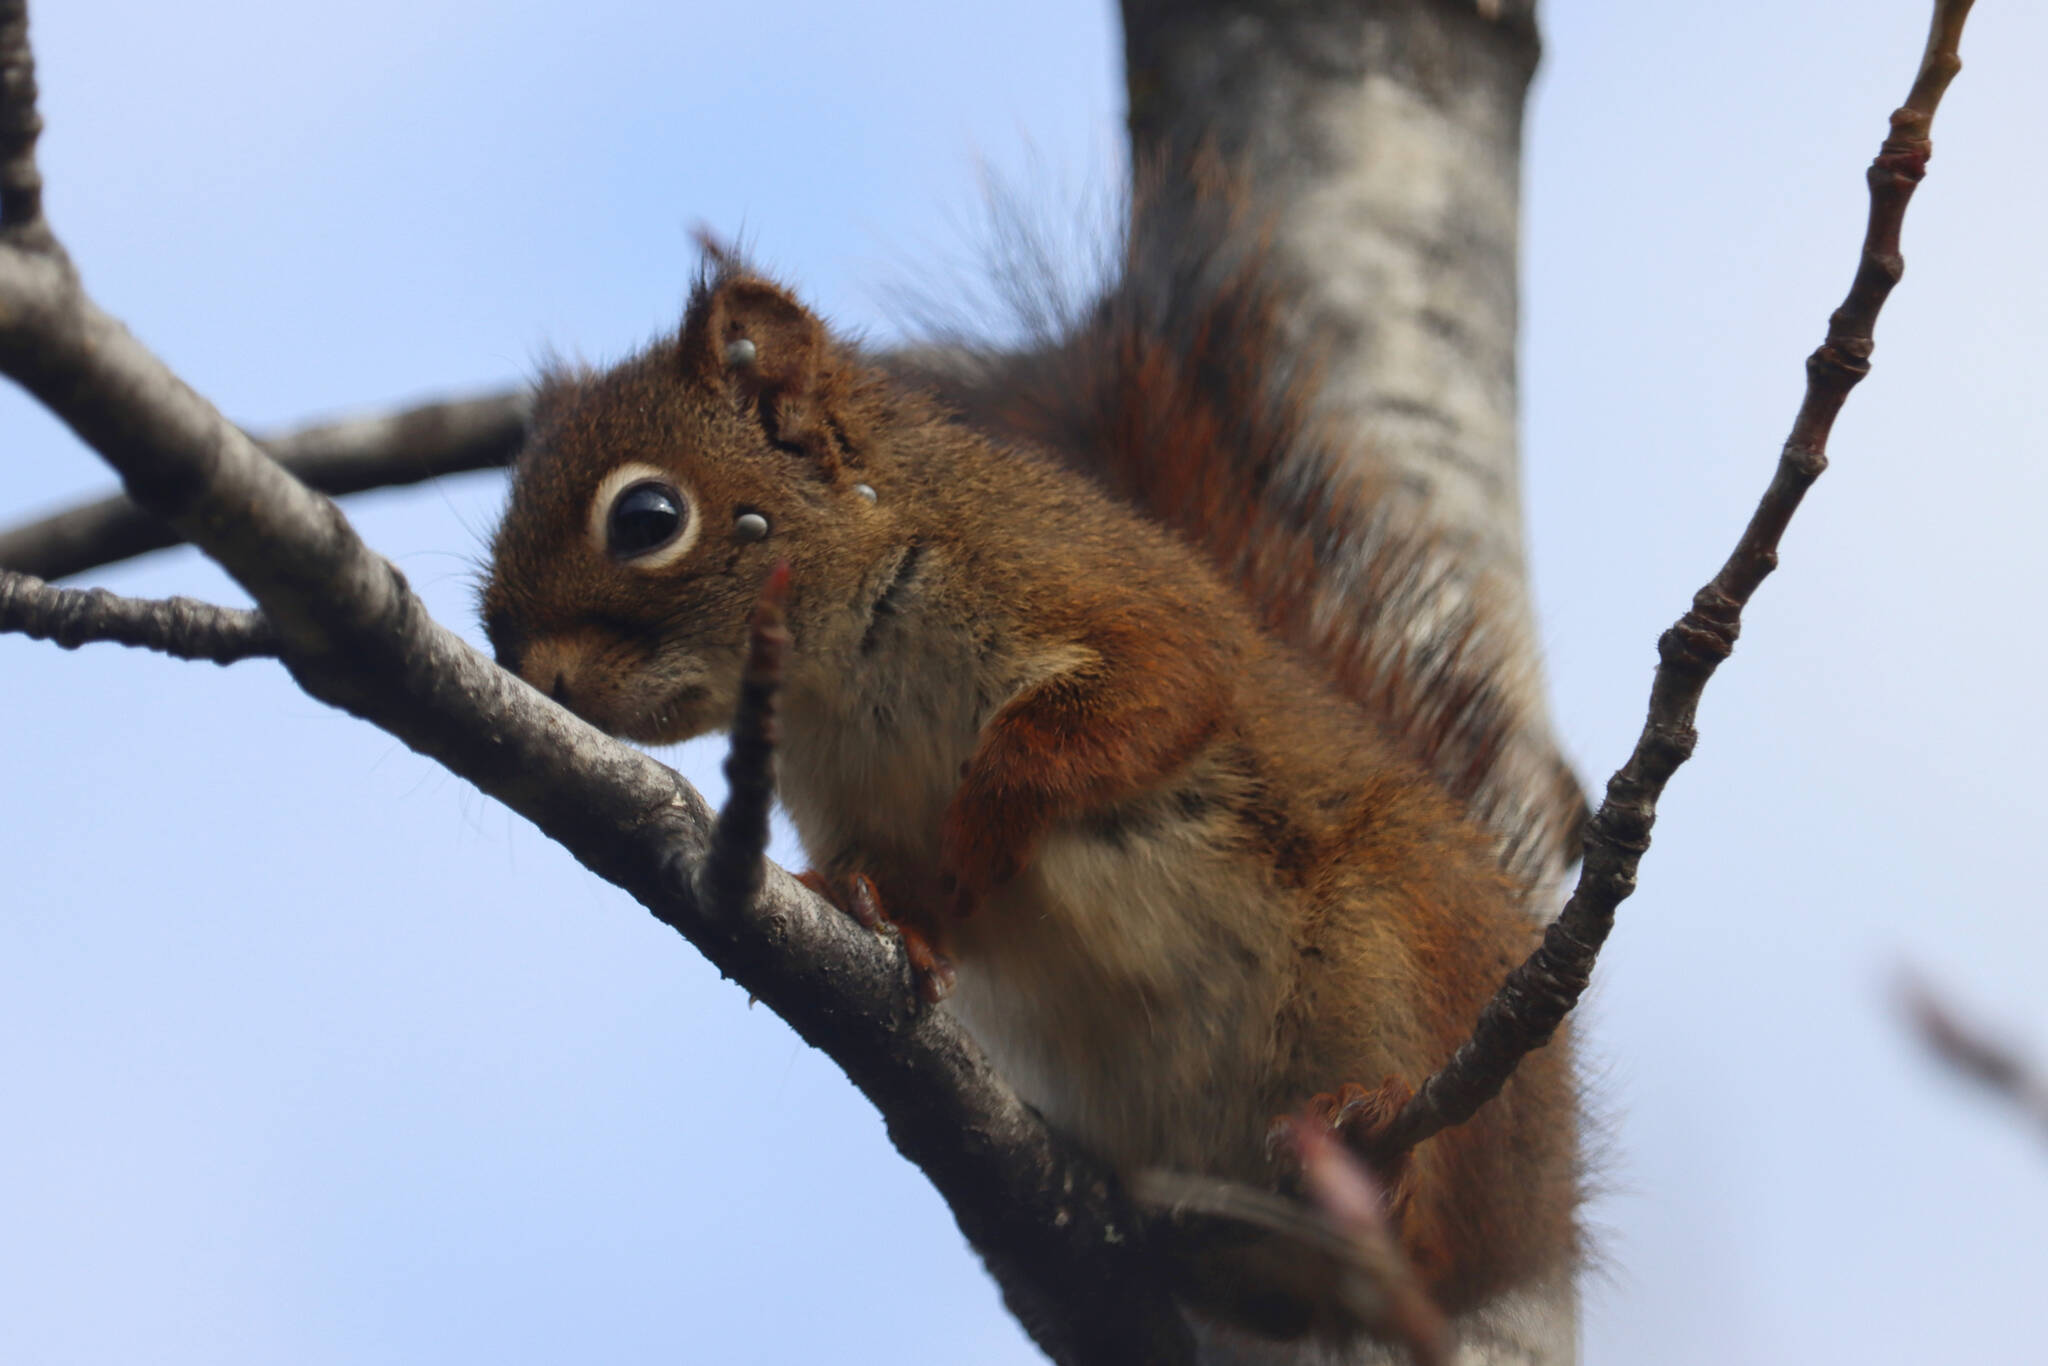 A squirrel with multiple ticks sits in a tree near the Mendenhall Glacier in September 2021. Ticks are among the observable impacts of climate change in Alaska, according to Mary F. Willson, as the warming climate brings other biological changes, including the northward spread of ticks, which has been well-documented in Eurasia and North America. (Ben Hohenstatt / Juneau Empire File)